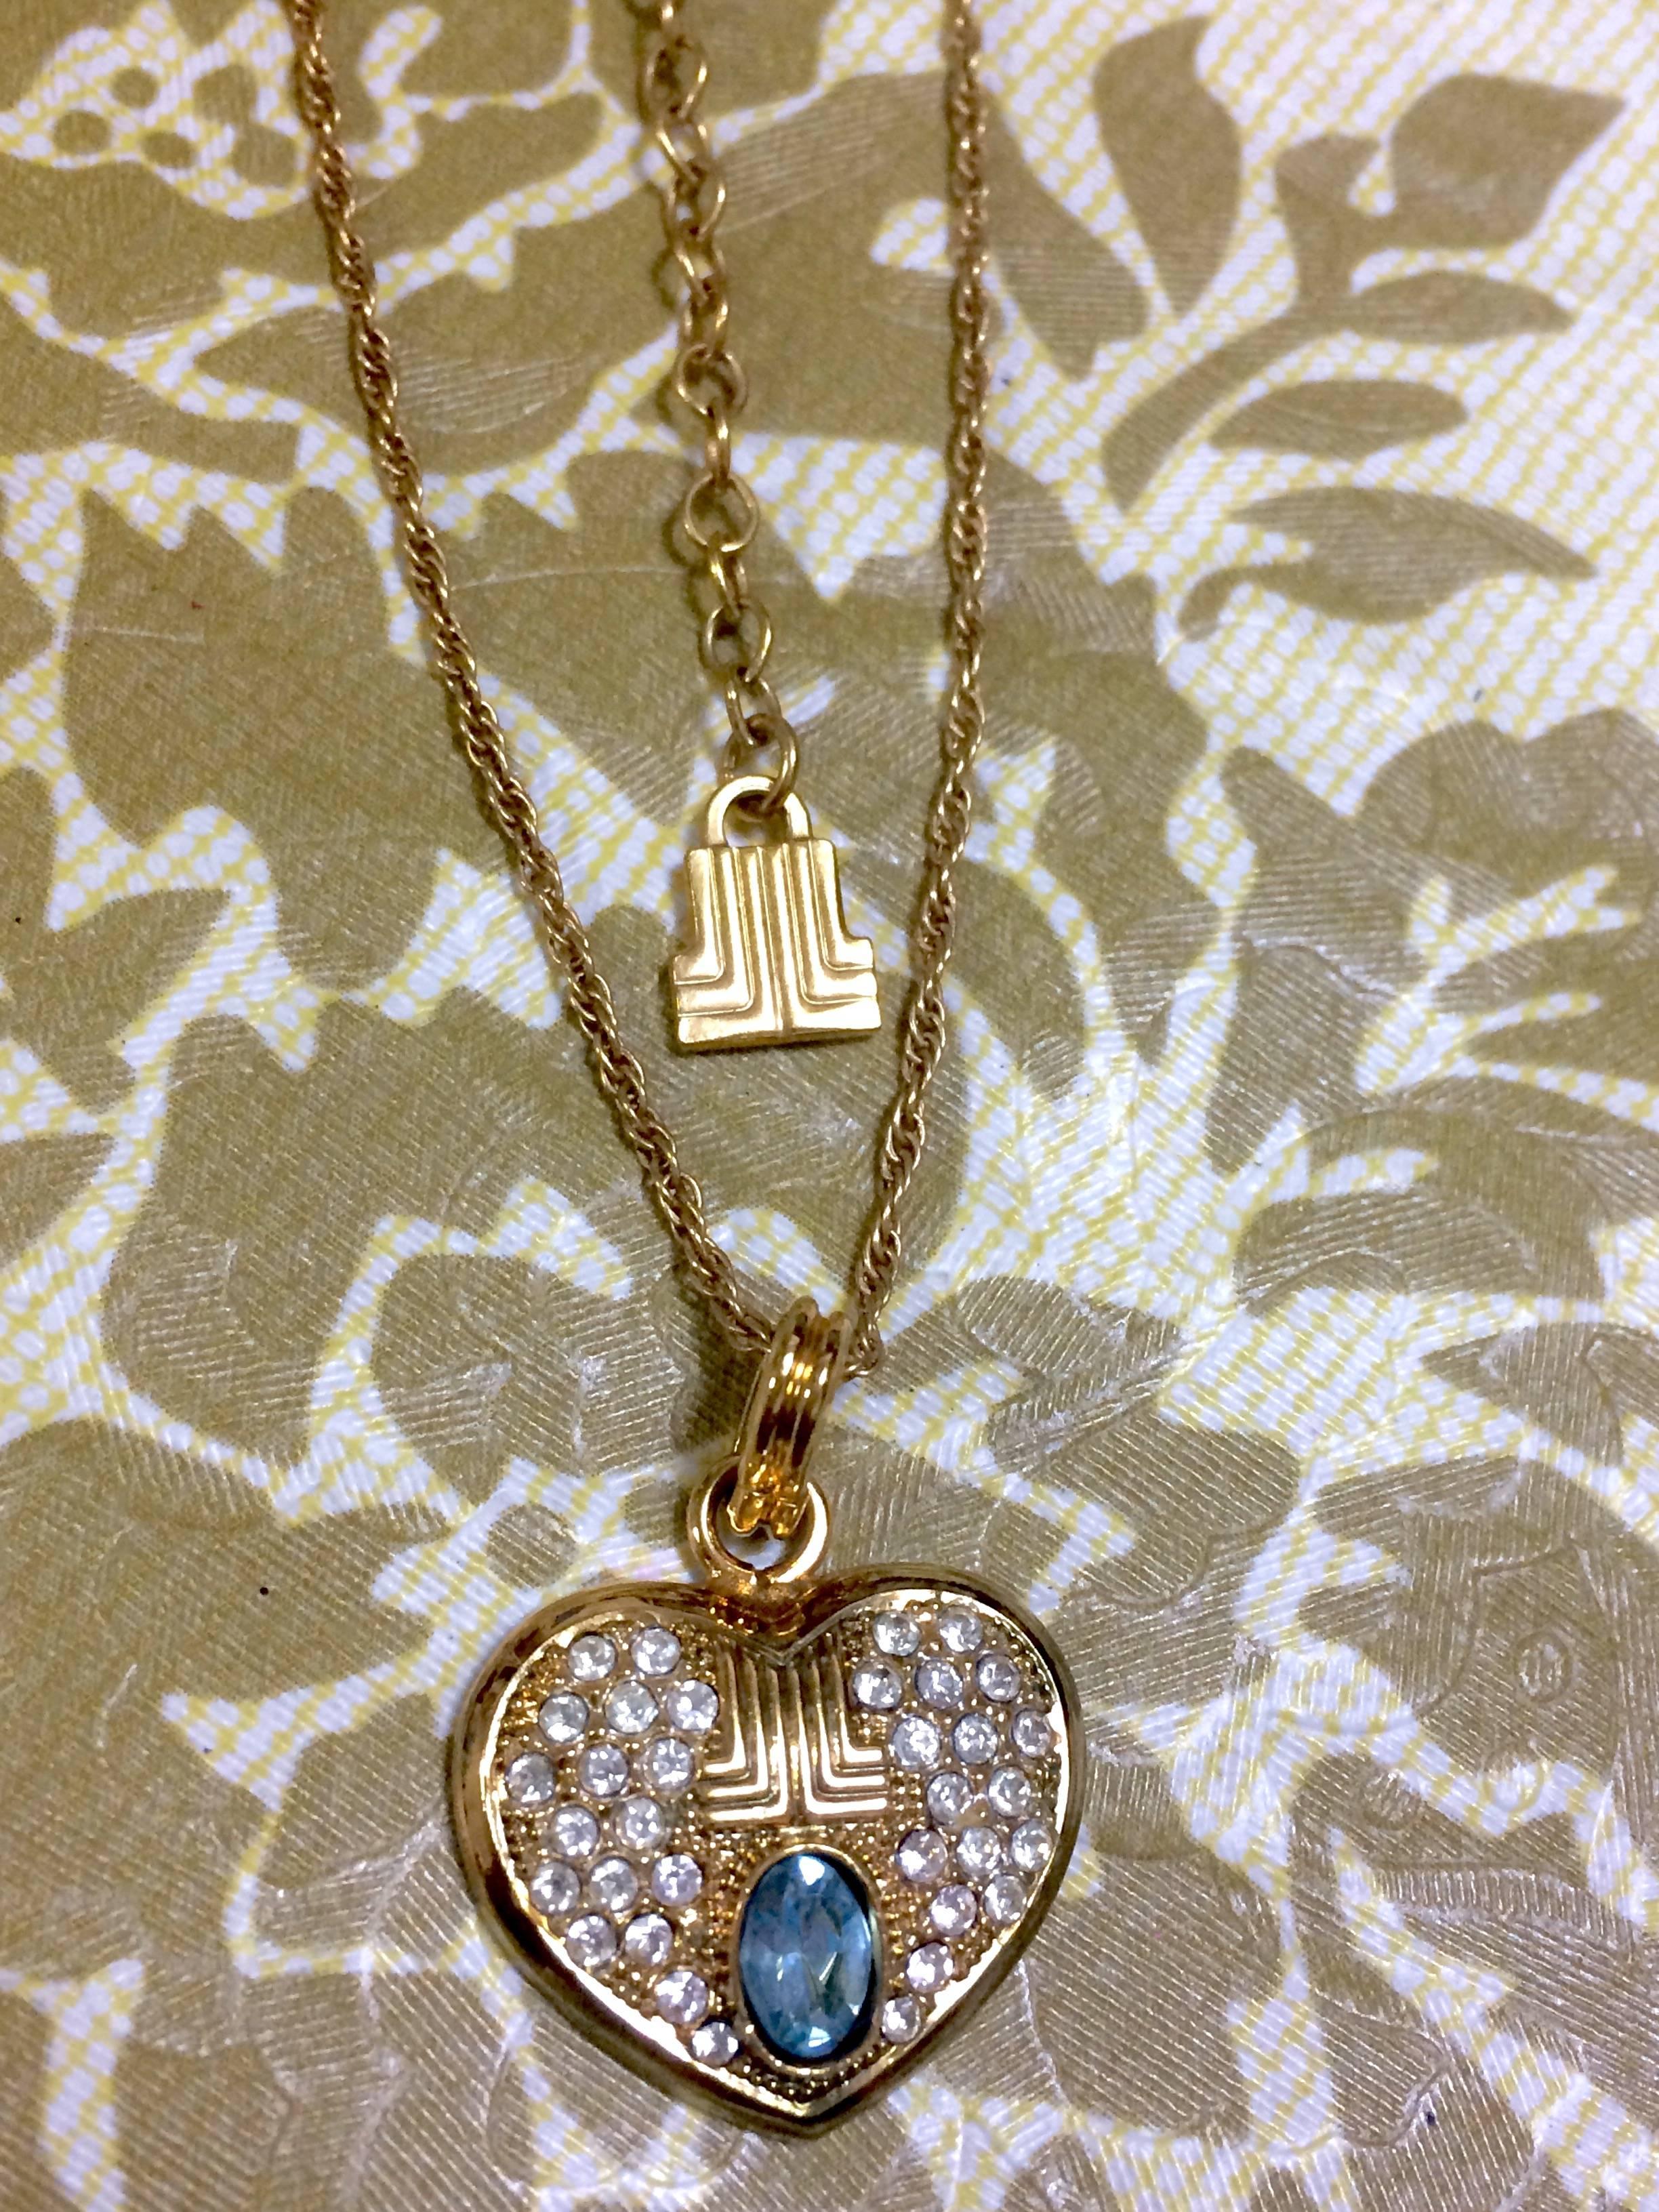 Vintage LANVIN skinny chain necklace with heart logo charm crystal pendant top In Excellent Condition For Sale In Kashiwa, Chiba